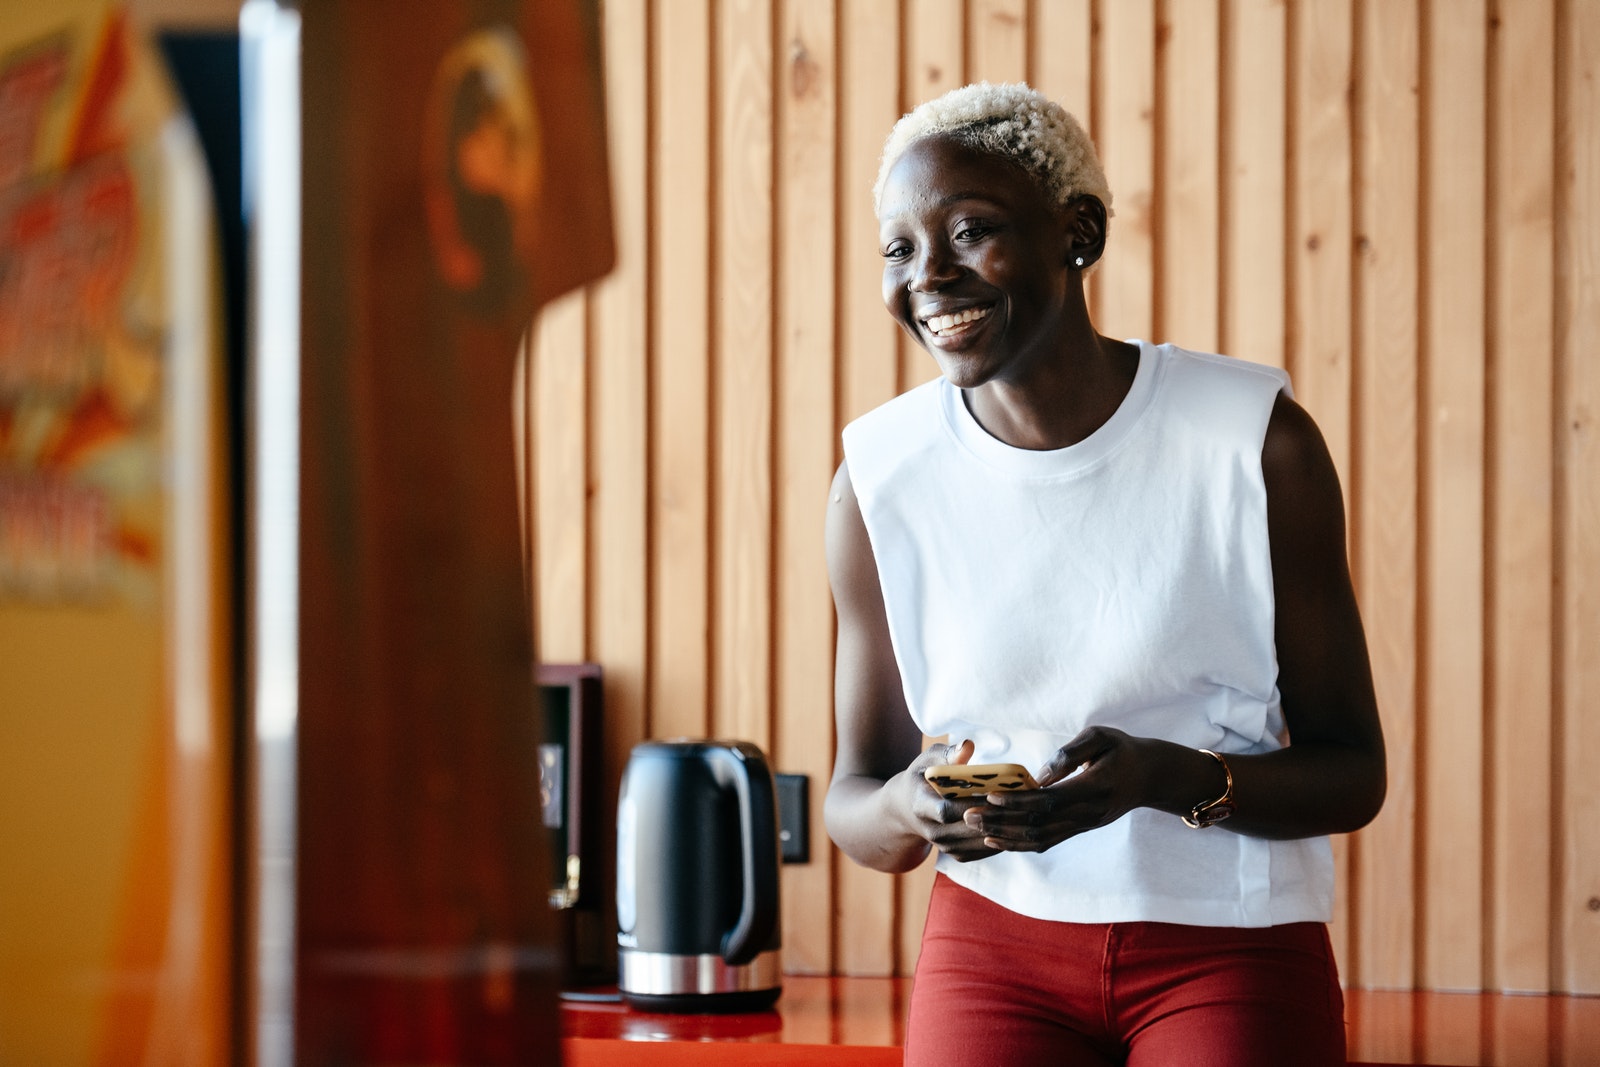 Young happy black woman using smartphone in office kitchen